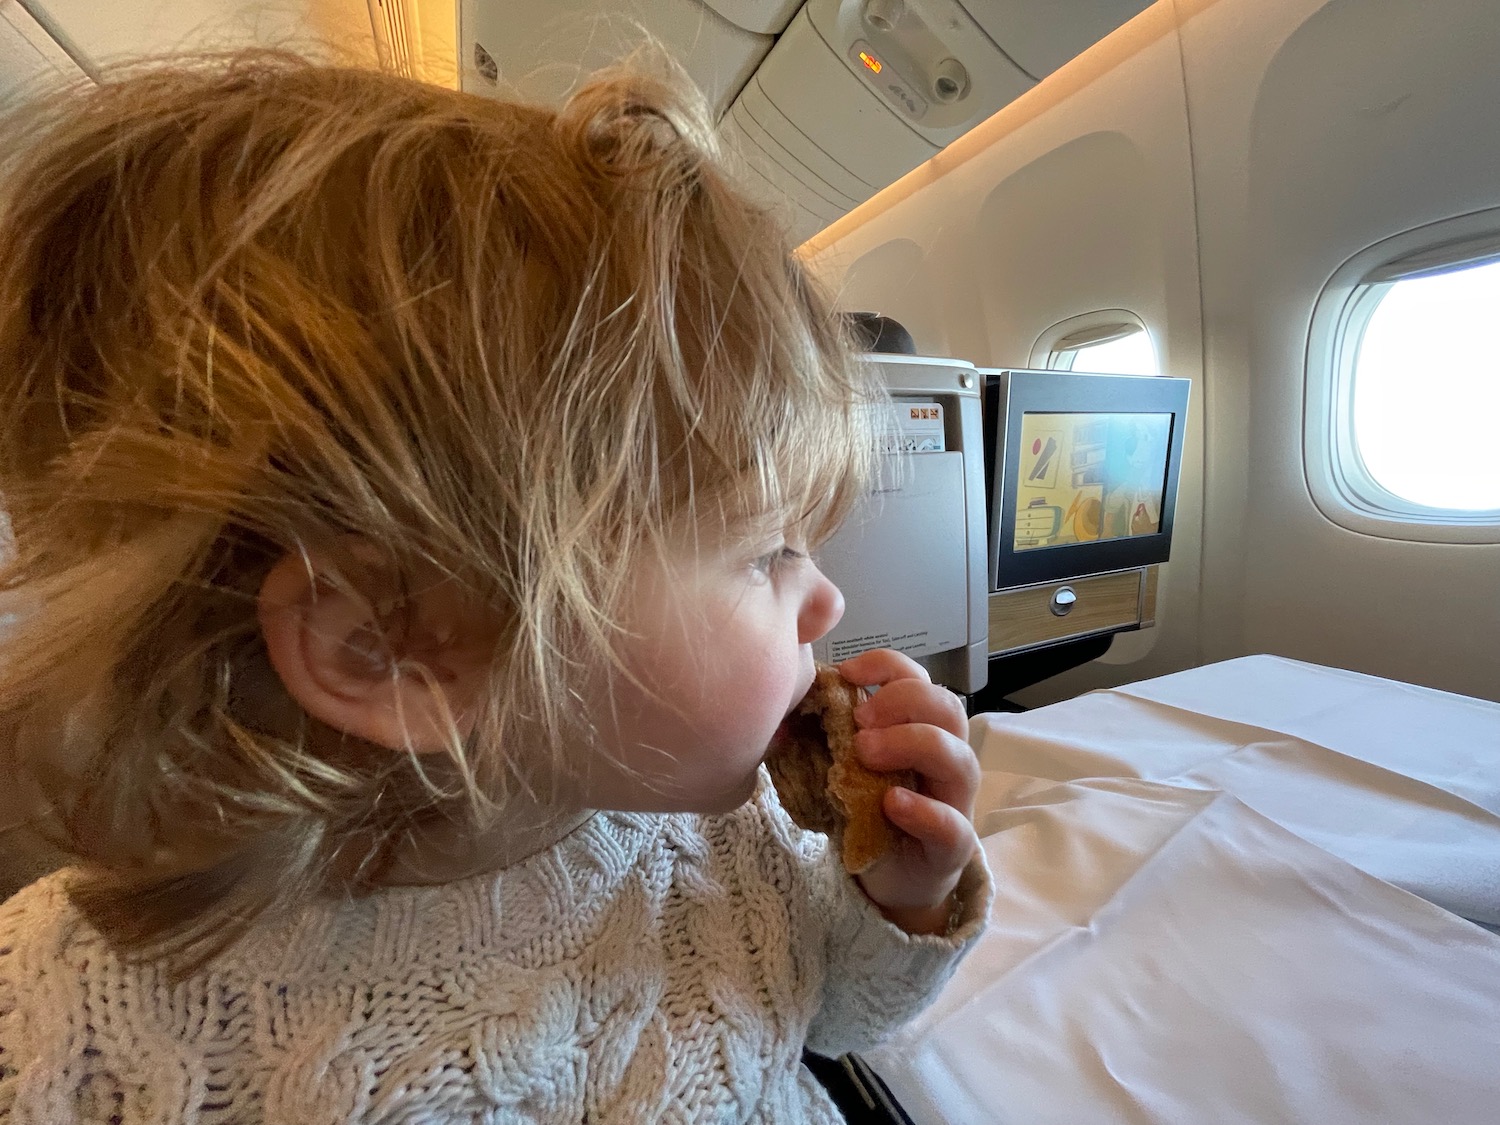 a child eating a cookie in an airplane